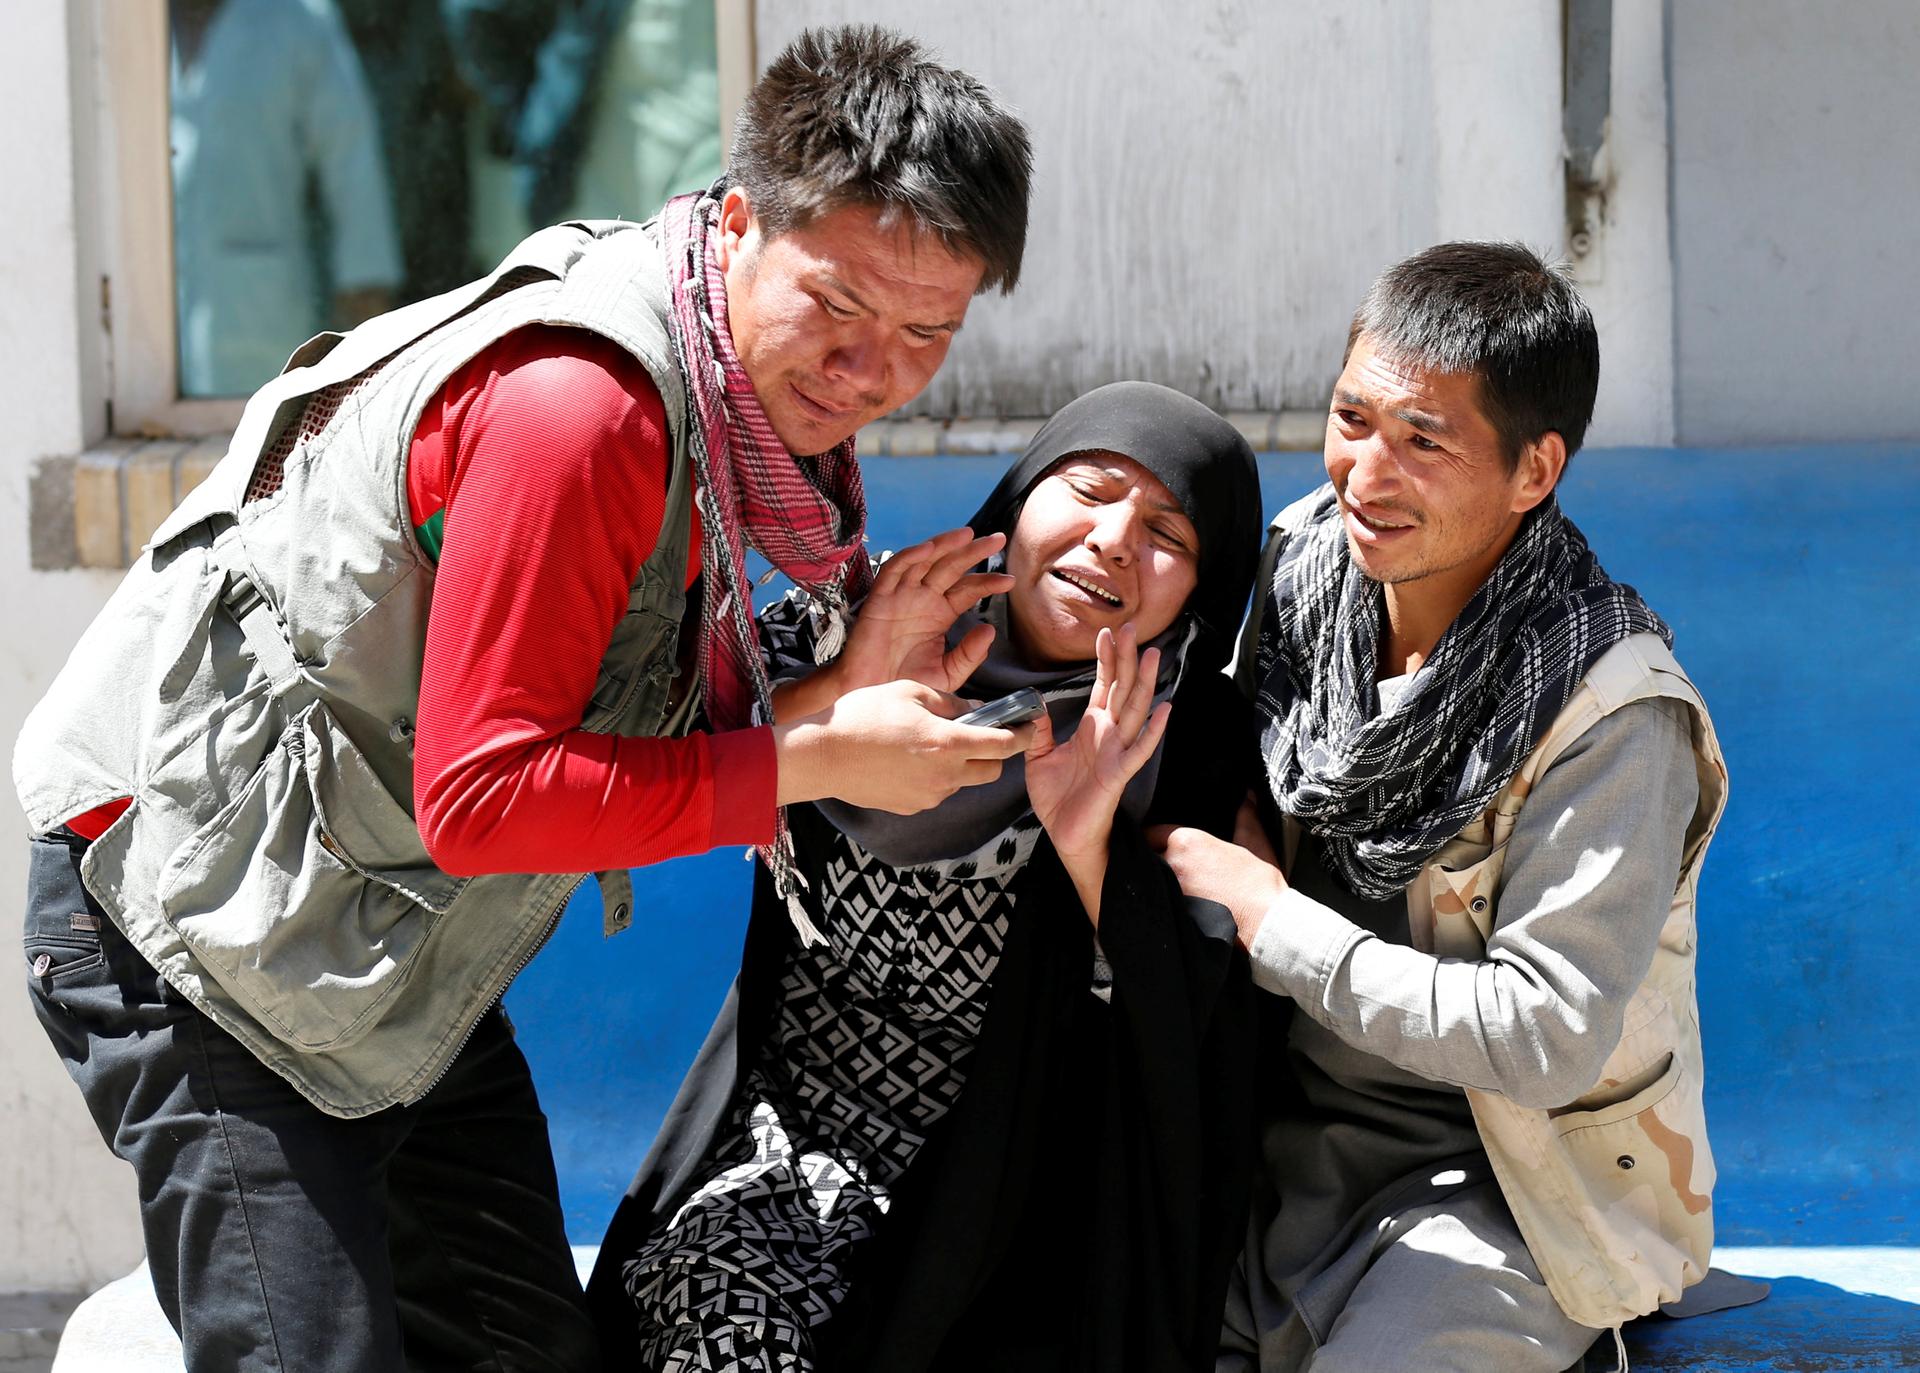 Two men hold of a greiving woman after a suicide attack in Kabul.